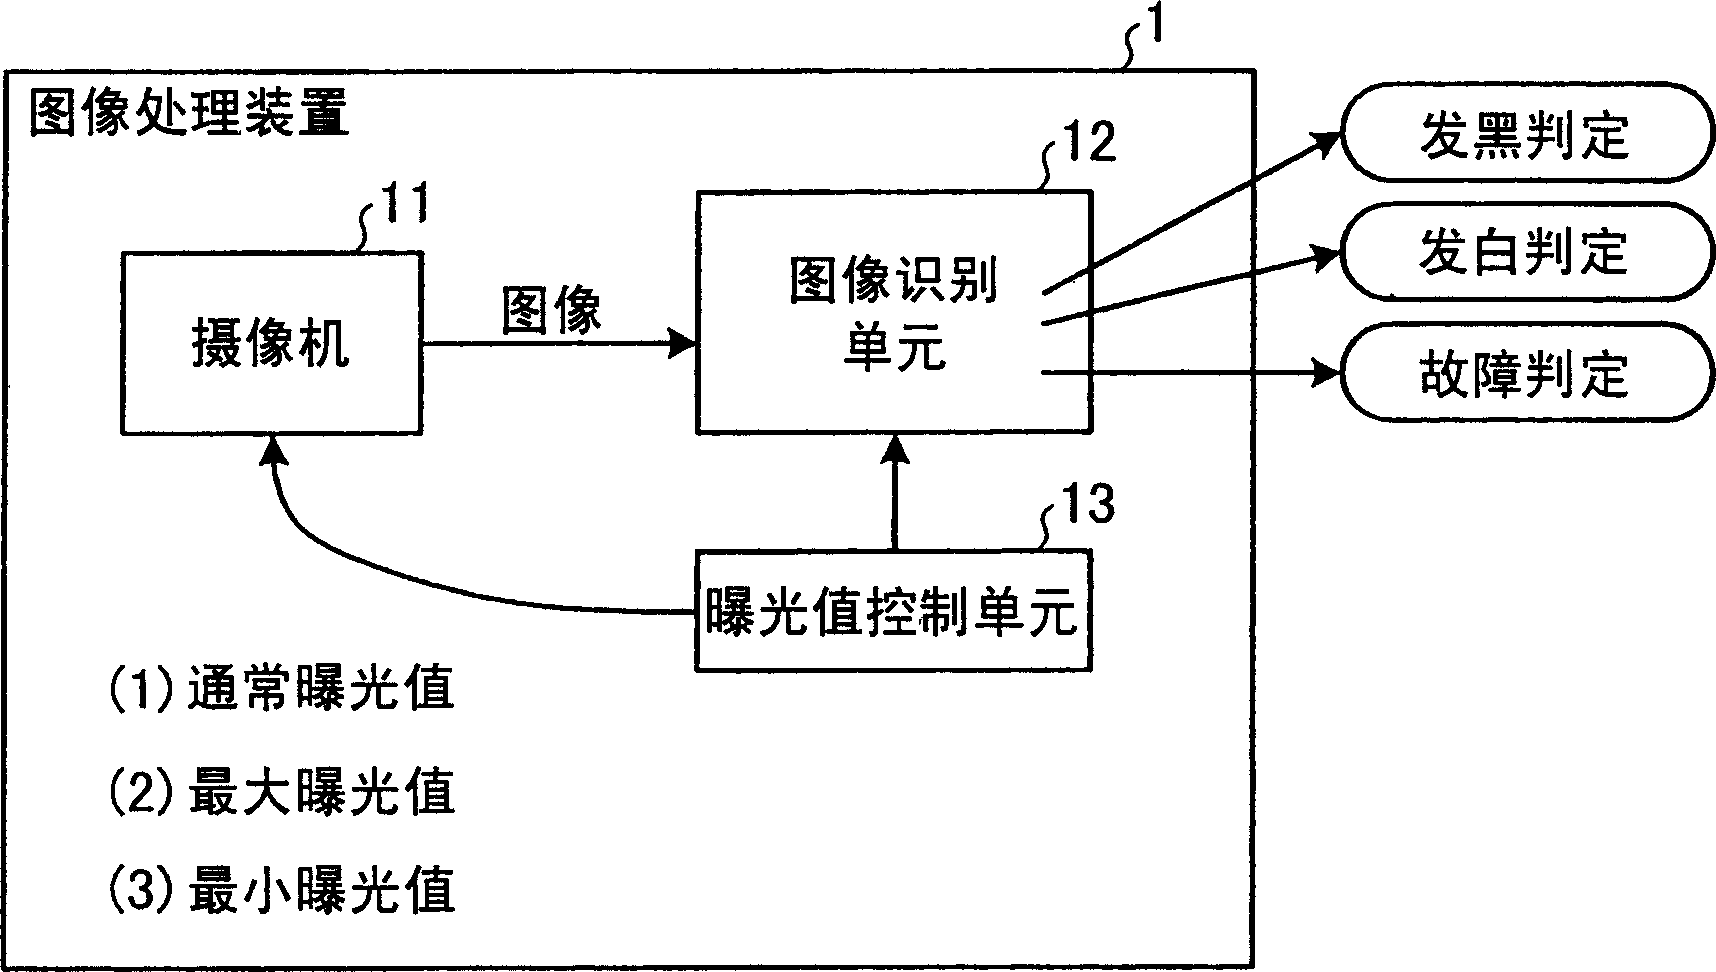 Image processing device, operation supporting device, and operation supporting system